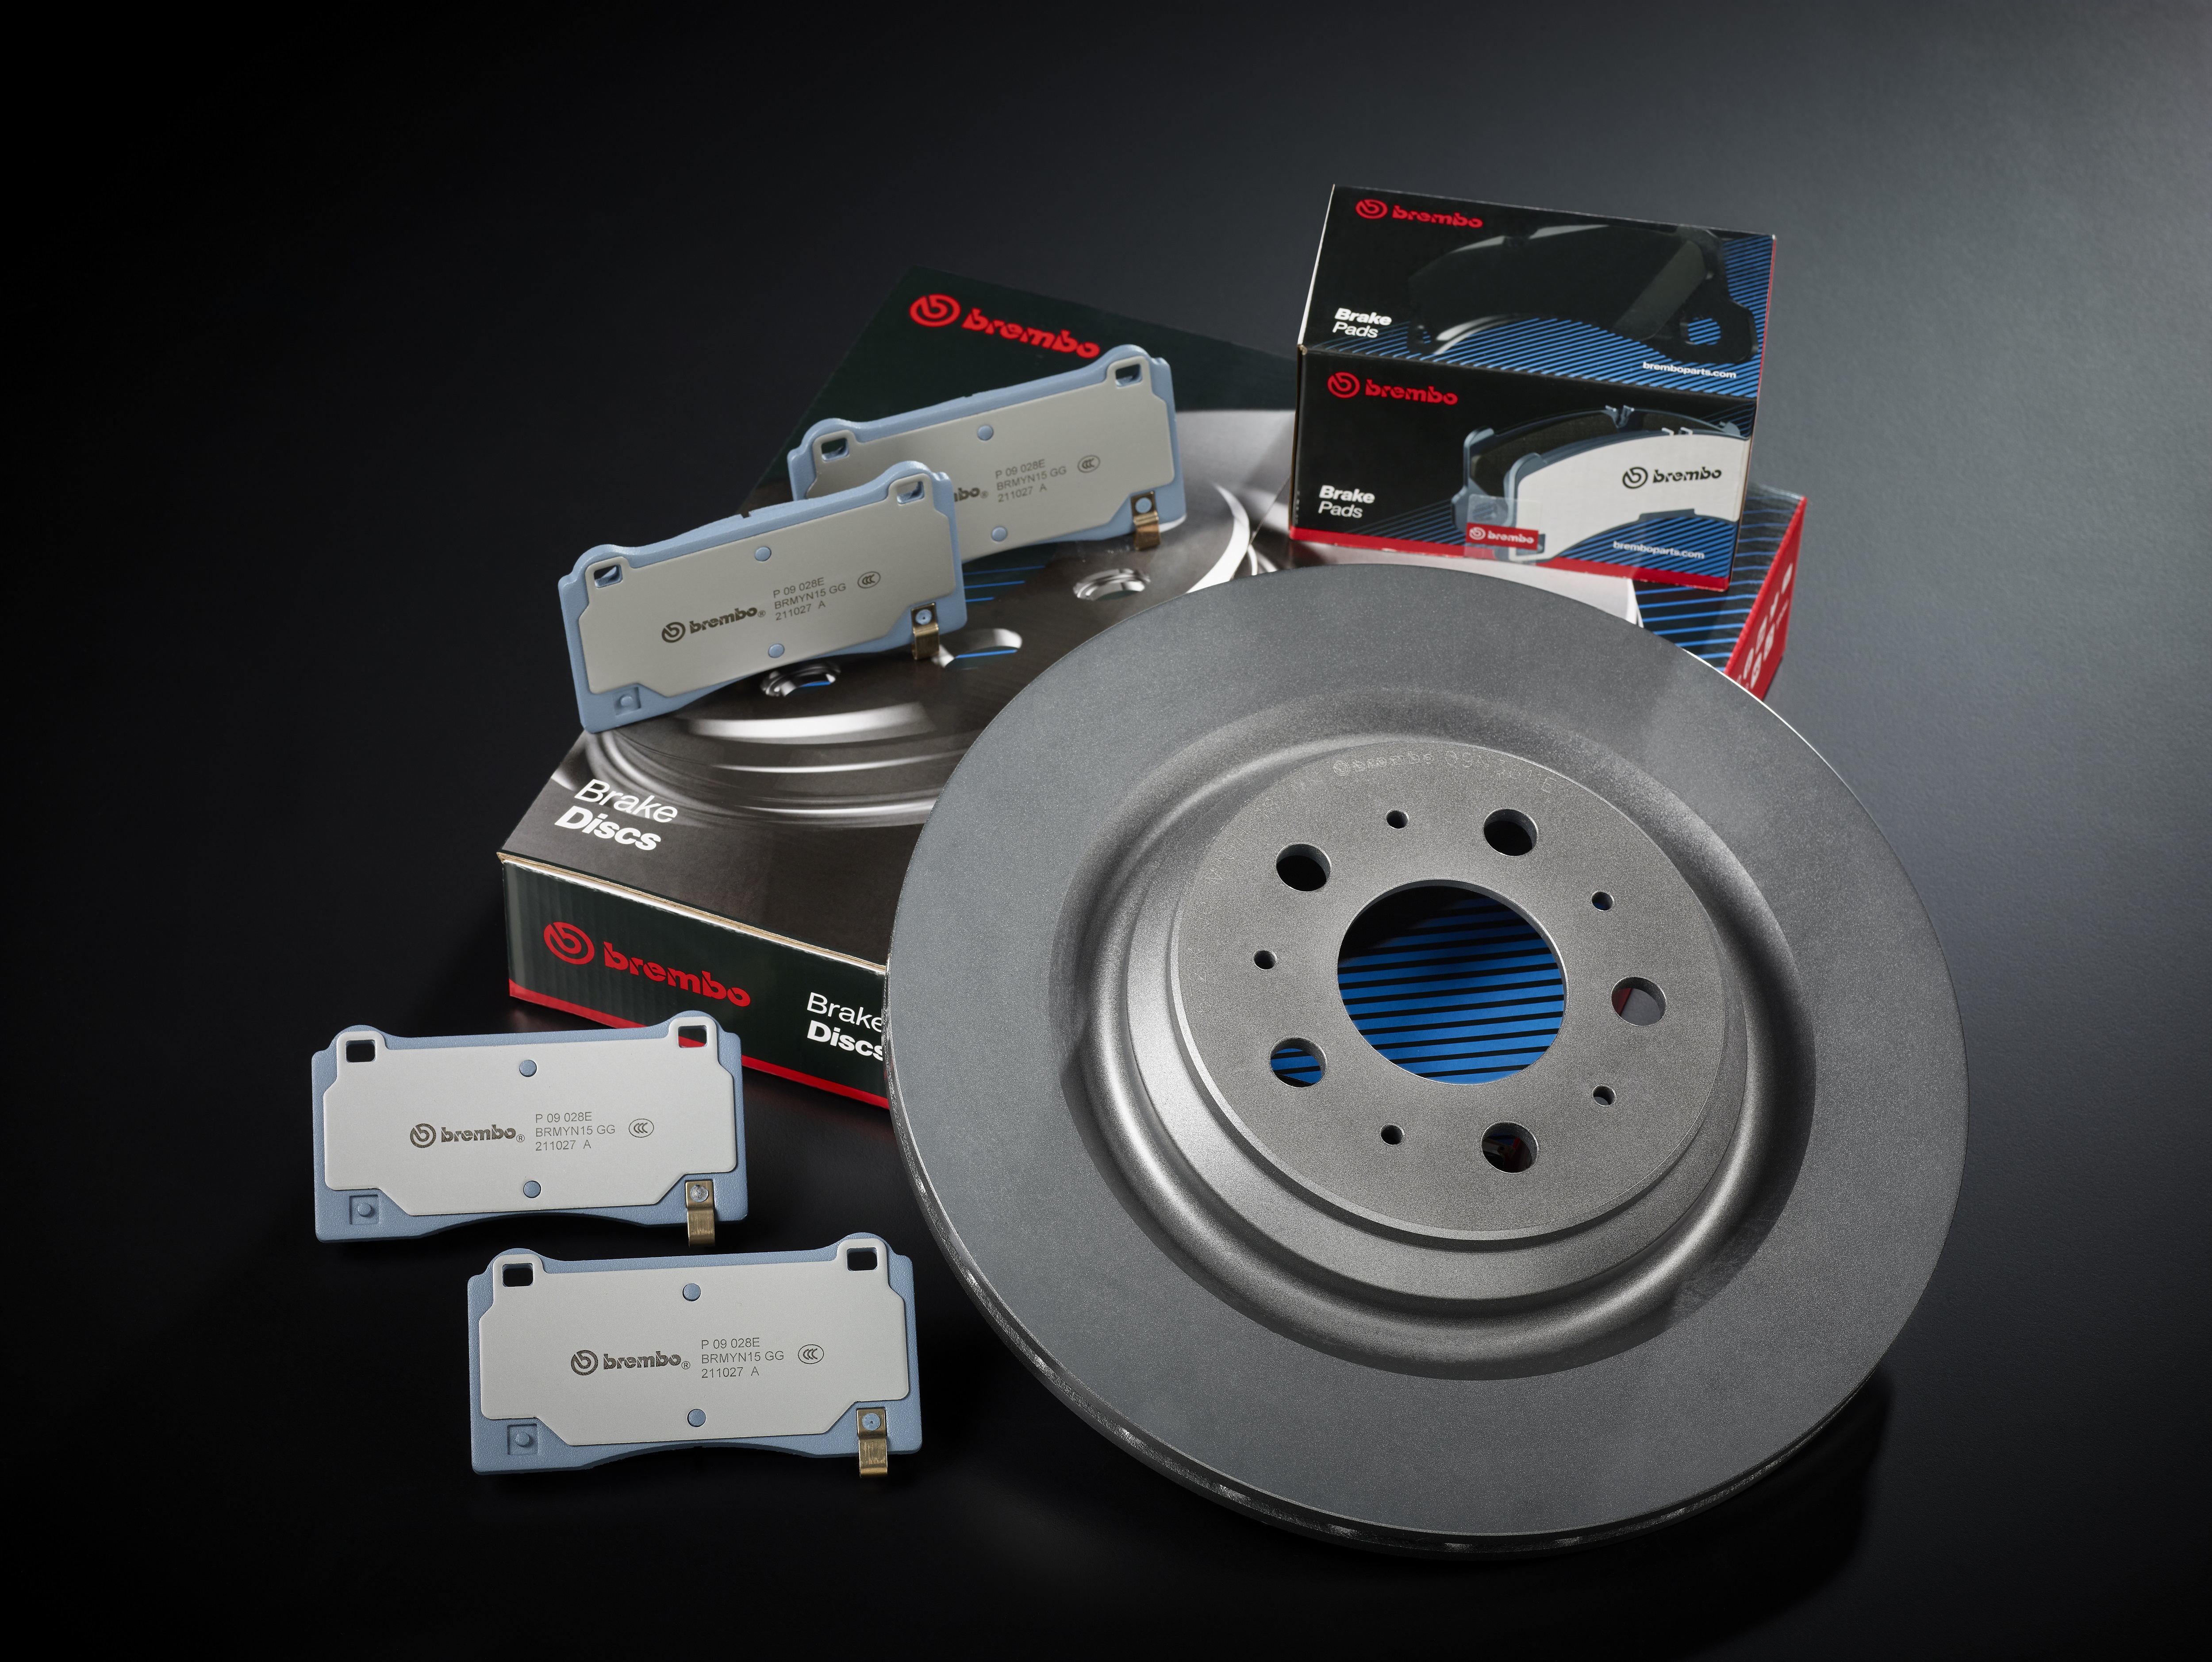 The new Brembo Beyond EV Kit awarded at the Motortec for